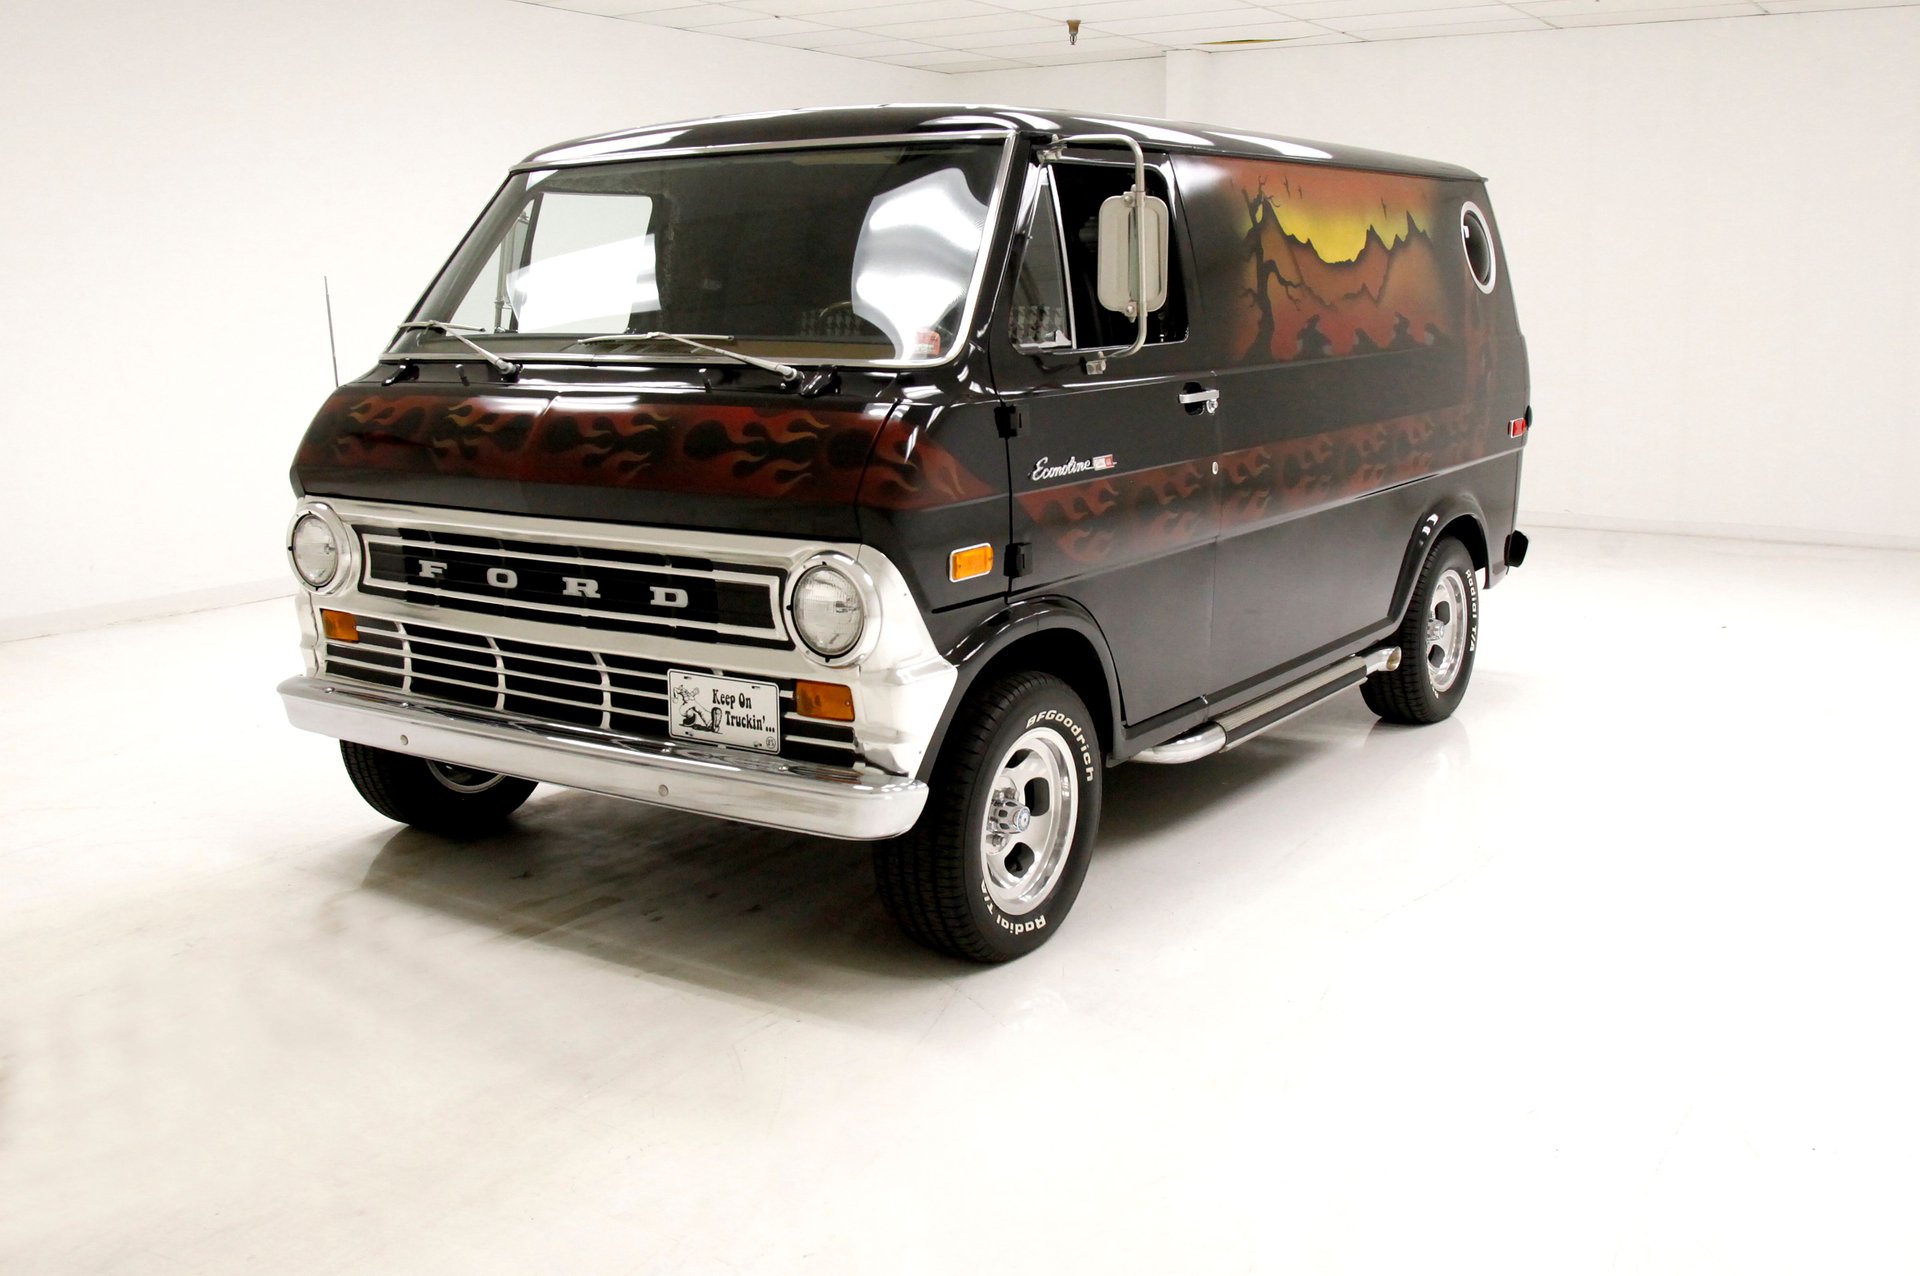 Classic Vans For Sale | Cars On Line.com | Classic Cars For Sale